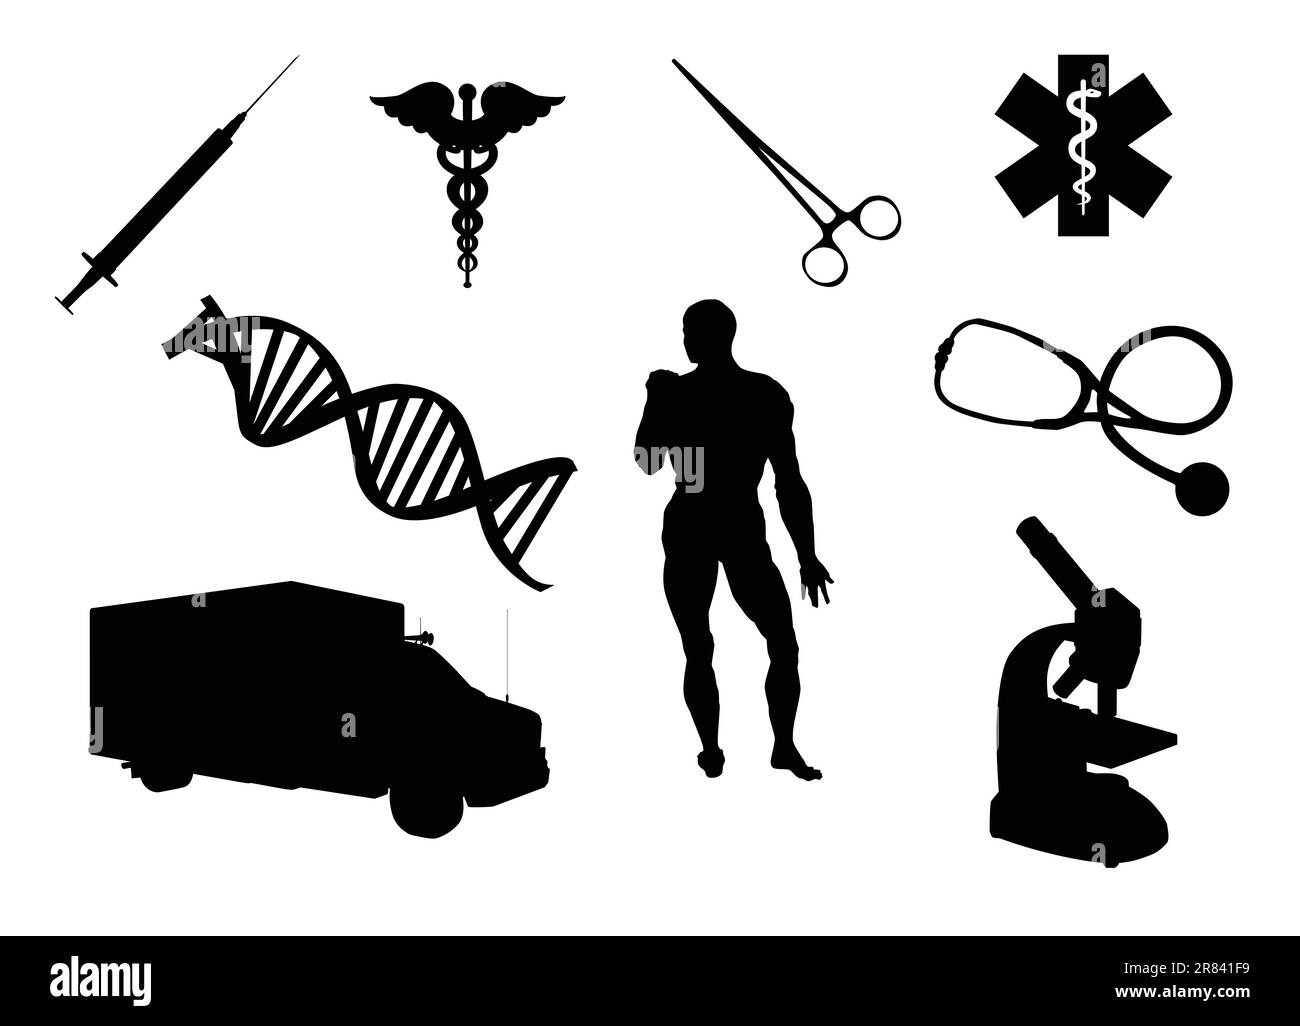 Medical equipment and related signs silhouettes, isolated on white background. Stock Vector